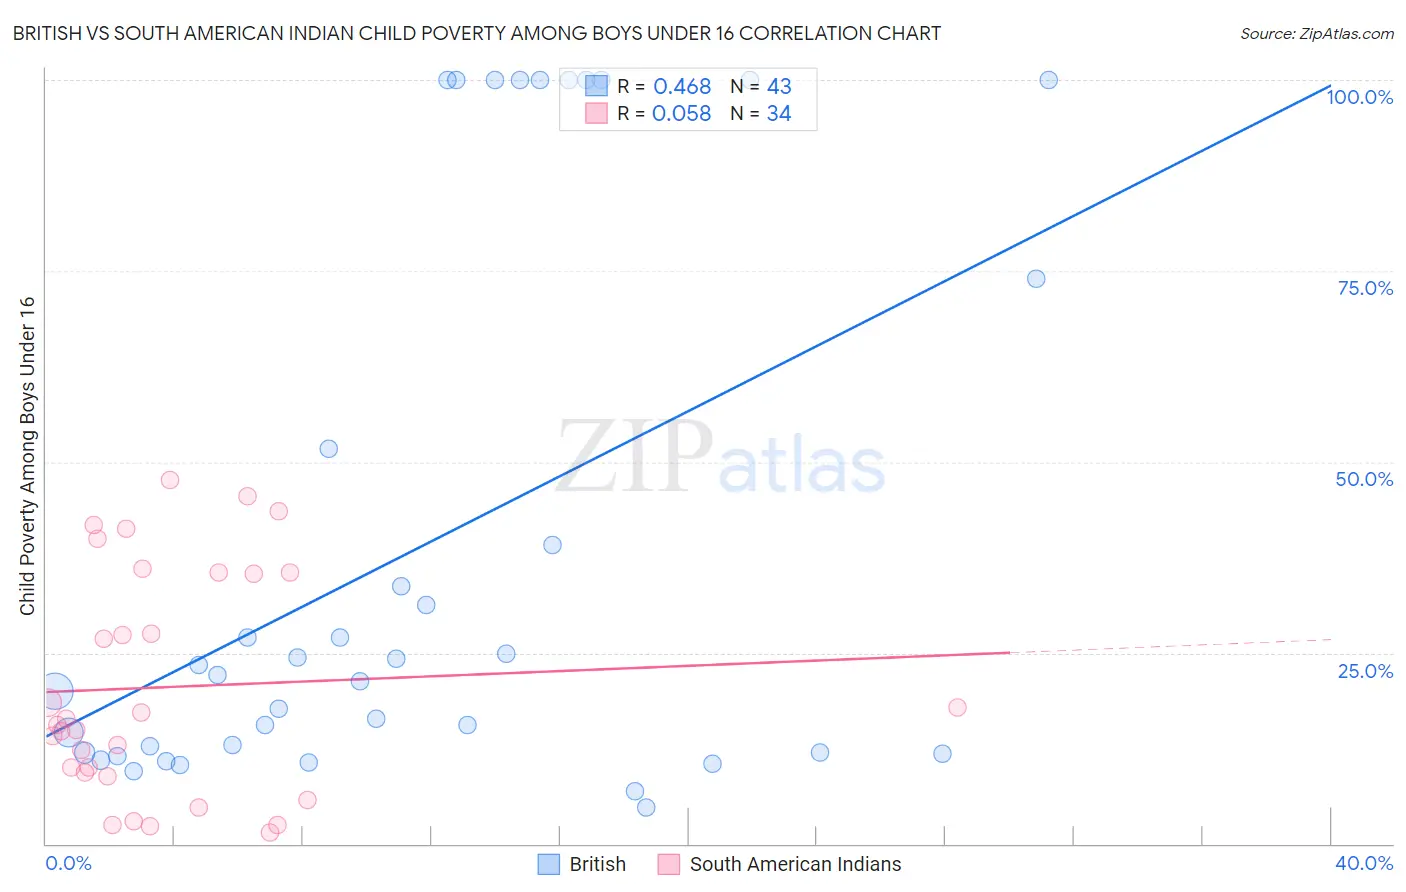 British vs South American Indian Child Poverty Among Boys Under 16